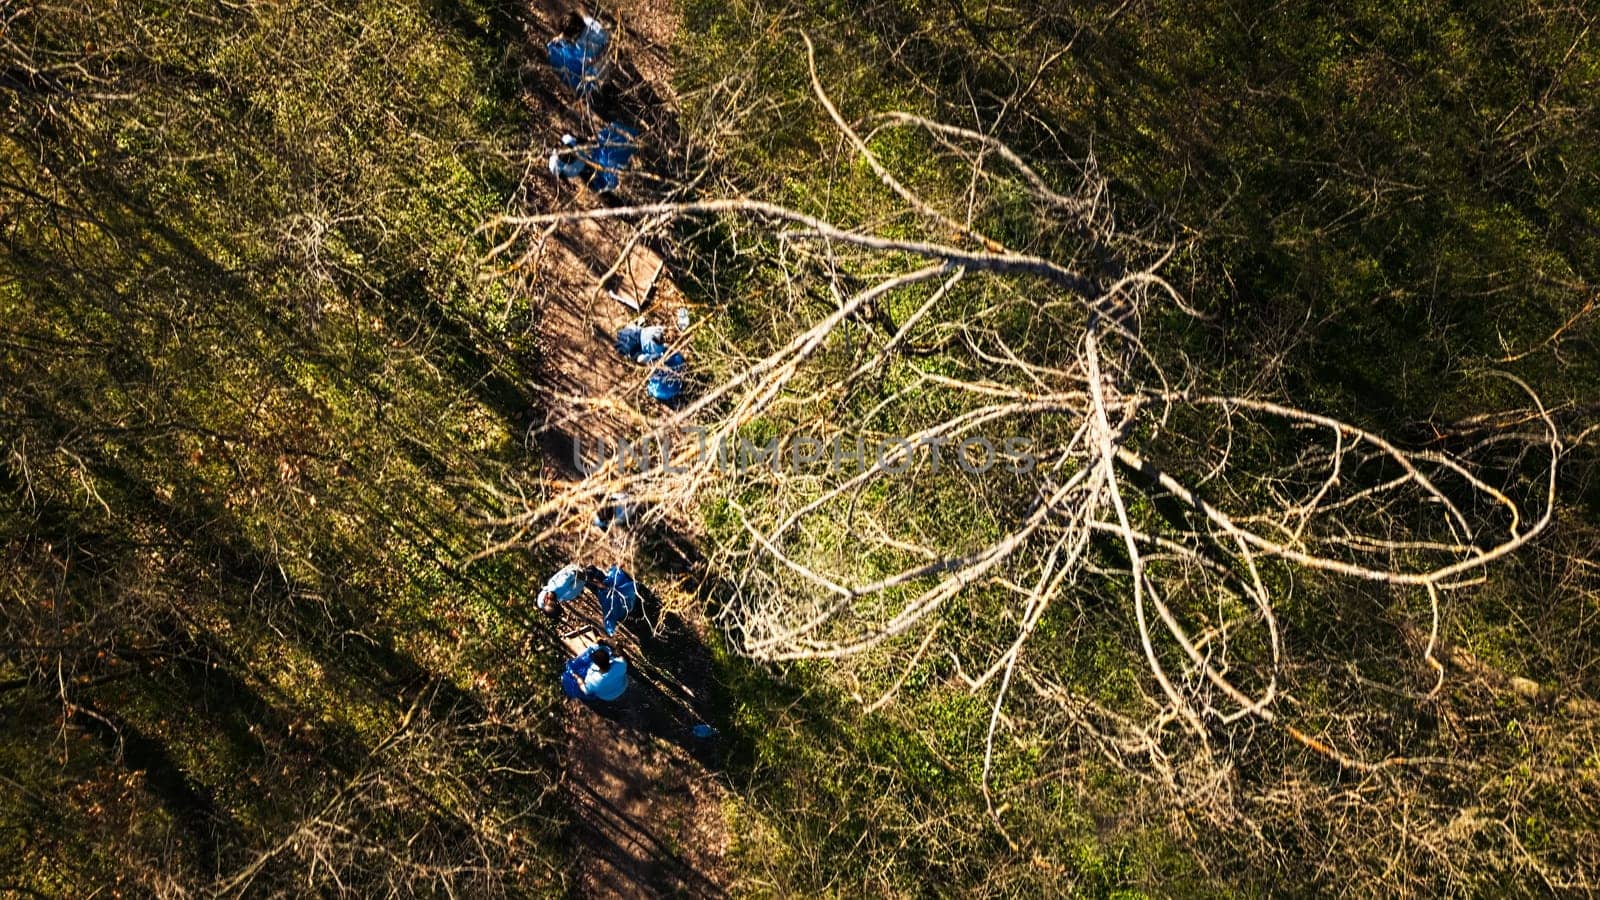 Aerial view of volunteers doing litter cleanup in a forest area by DCStudio